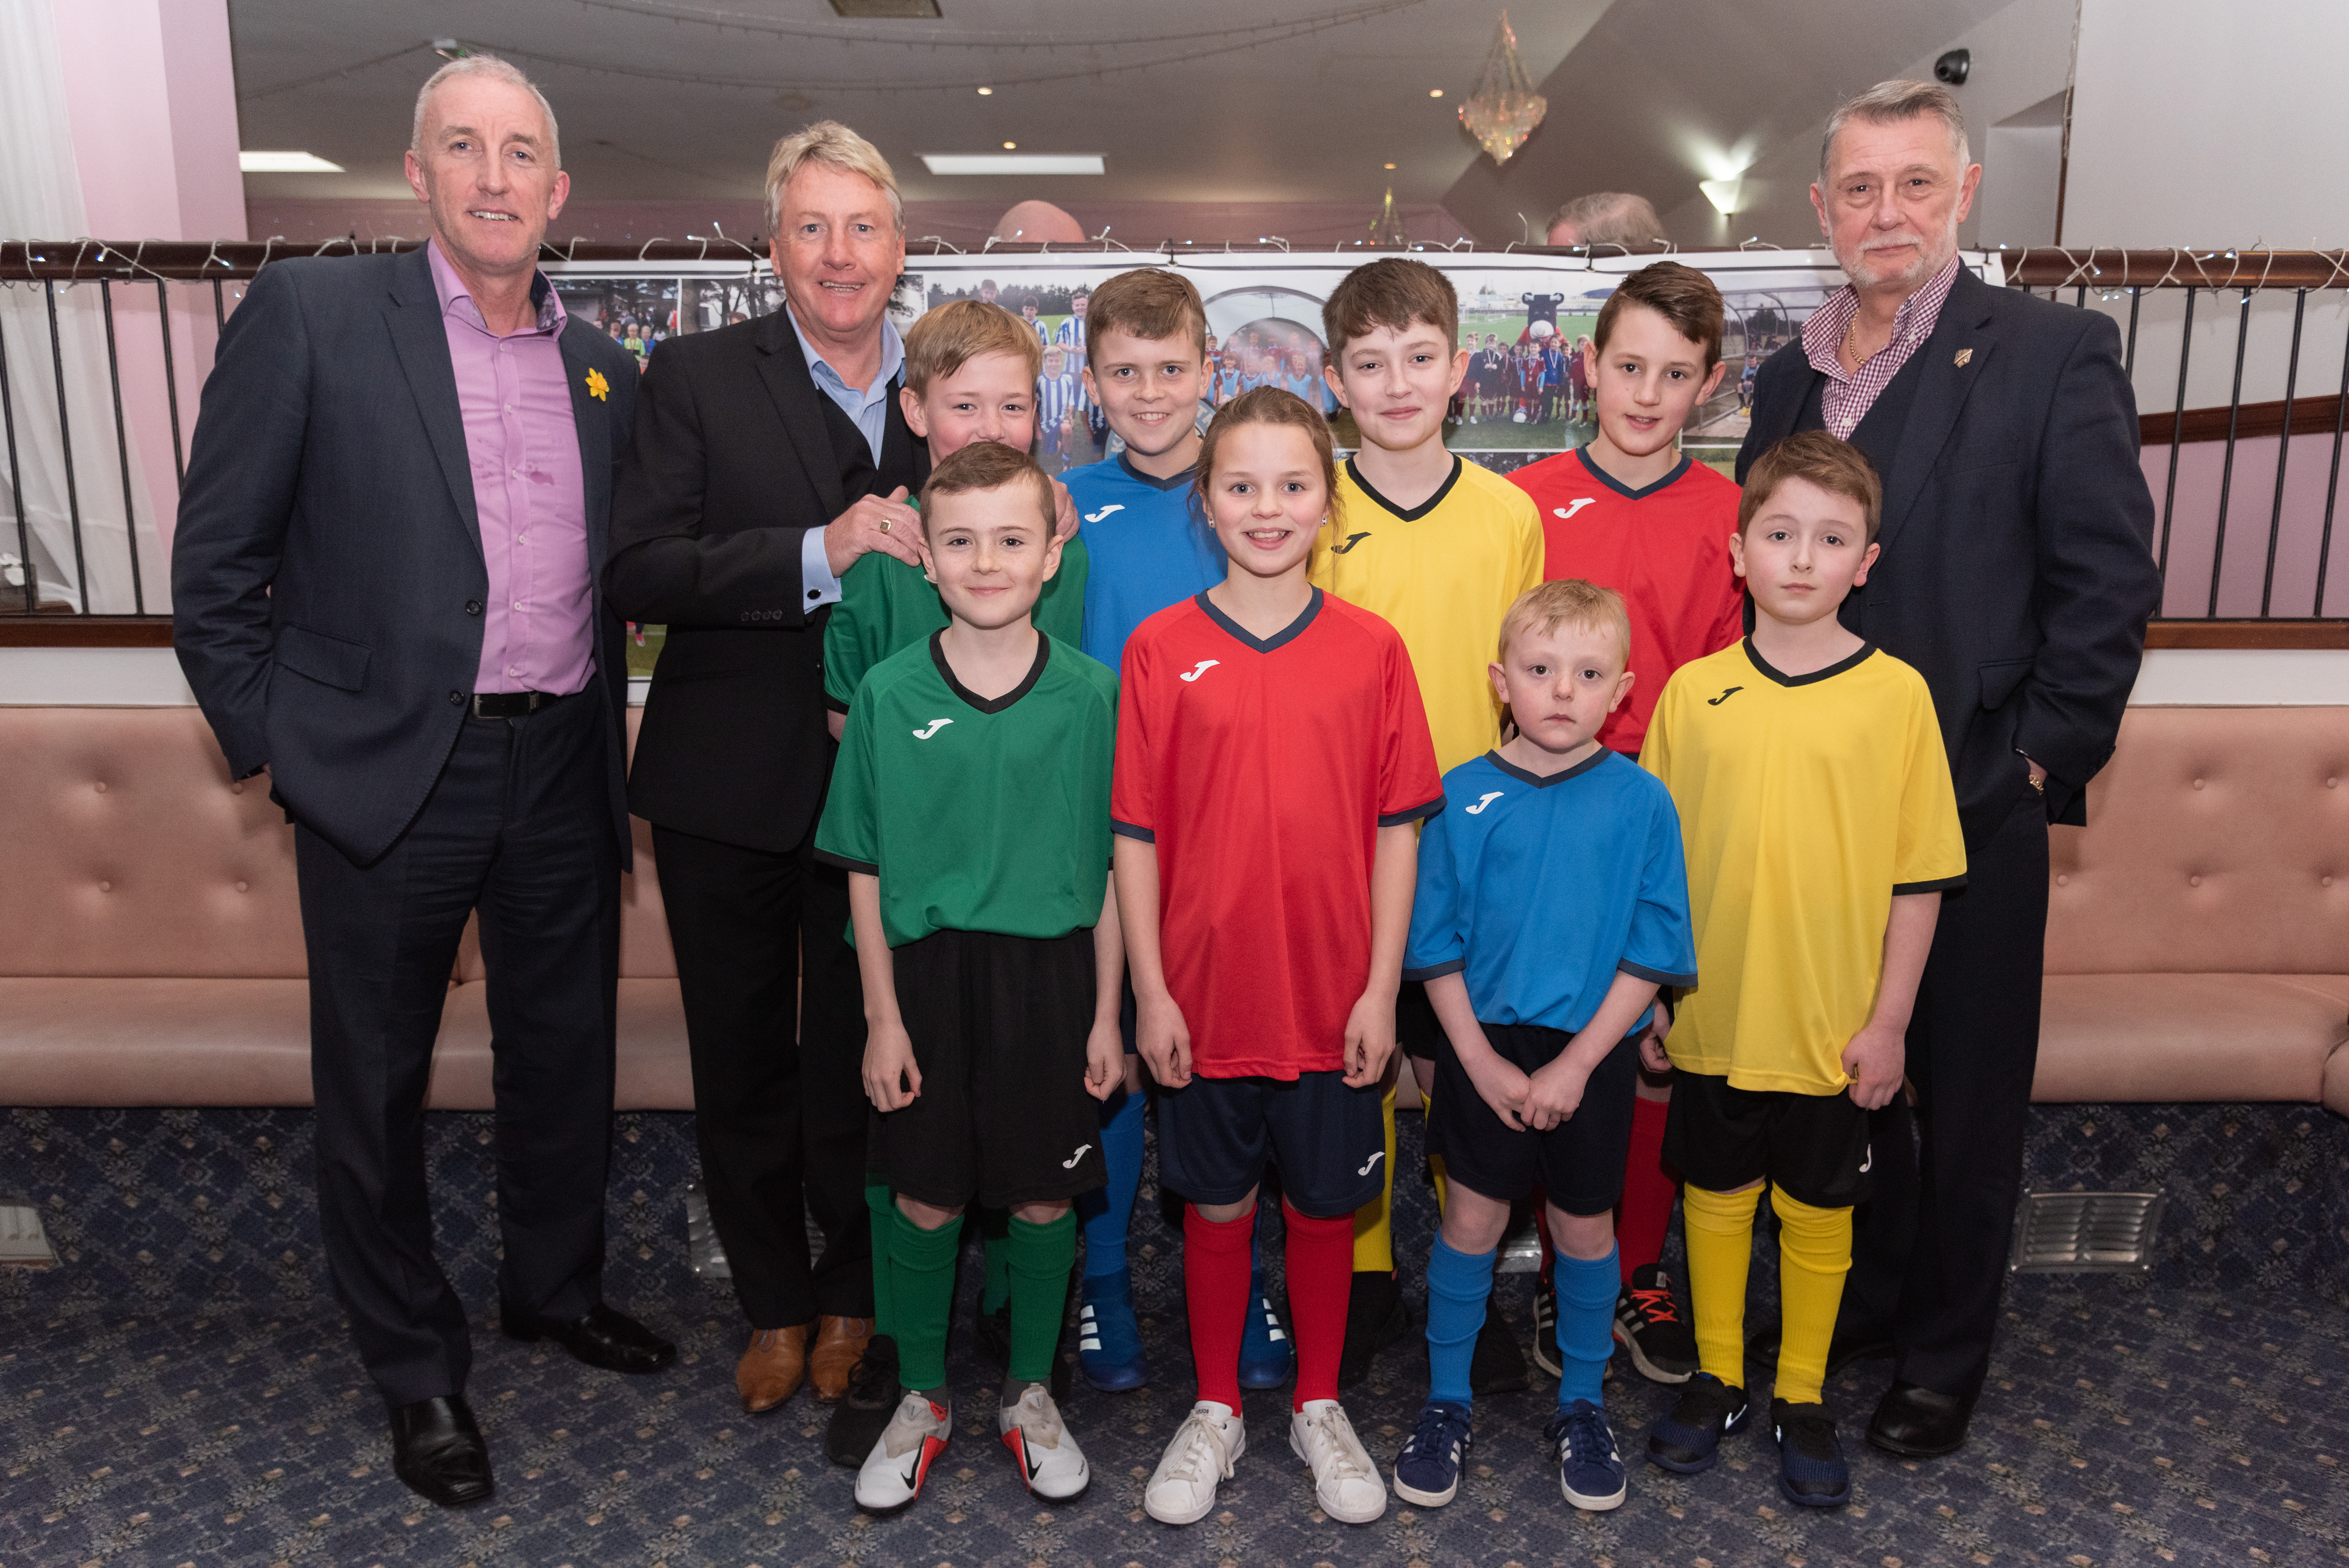 The money used will help the group buy new equipment and football strips. Pictured, with guest speakers Frank McAvennie and Donald Findlay: Lucy Mark, Ben Fettes, Lewie Mckenzie, Ryan Garden, Logan Mckenzie, Sonny Dalgarno, Jake Taylor, Finn Davidson.